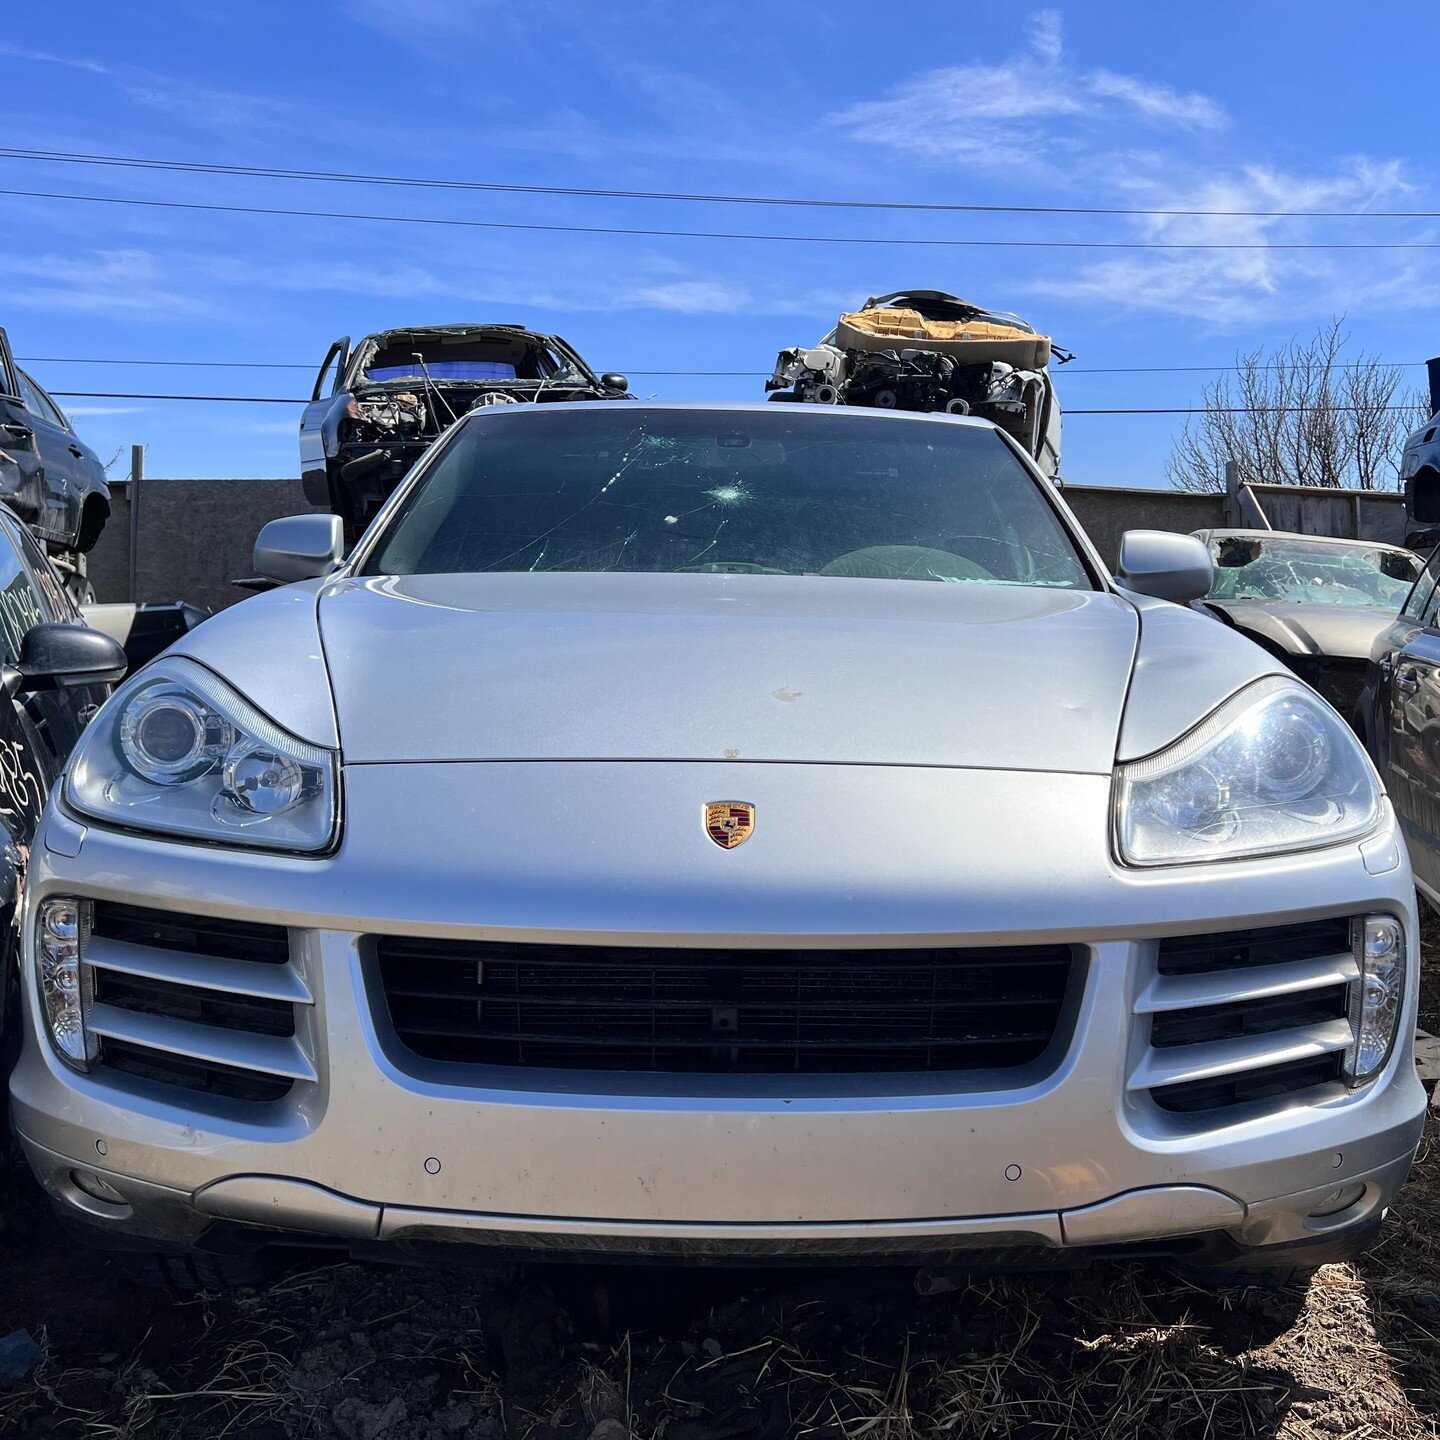 2008 PORSCHE CAYENNE S 4.8L *FOR PARTS* - 4WD, AUTOMATIC TIPTRONIC TRANSMISSION, 8 CYLINDER , SILVER(LA7W), KMS:136466, VIN:WP1AB29P98LA34621 

We offer contactless delivery and are more than willing to accommodate your needs.
Why pick your part when